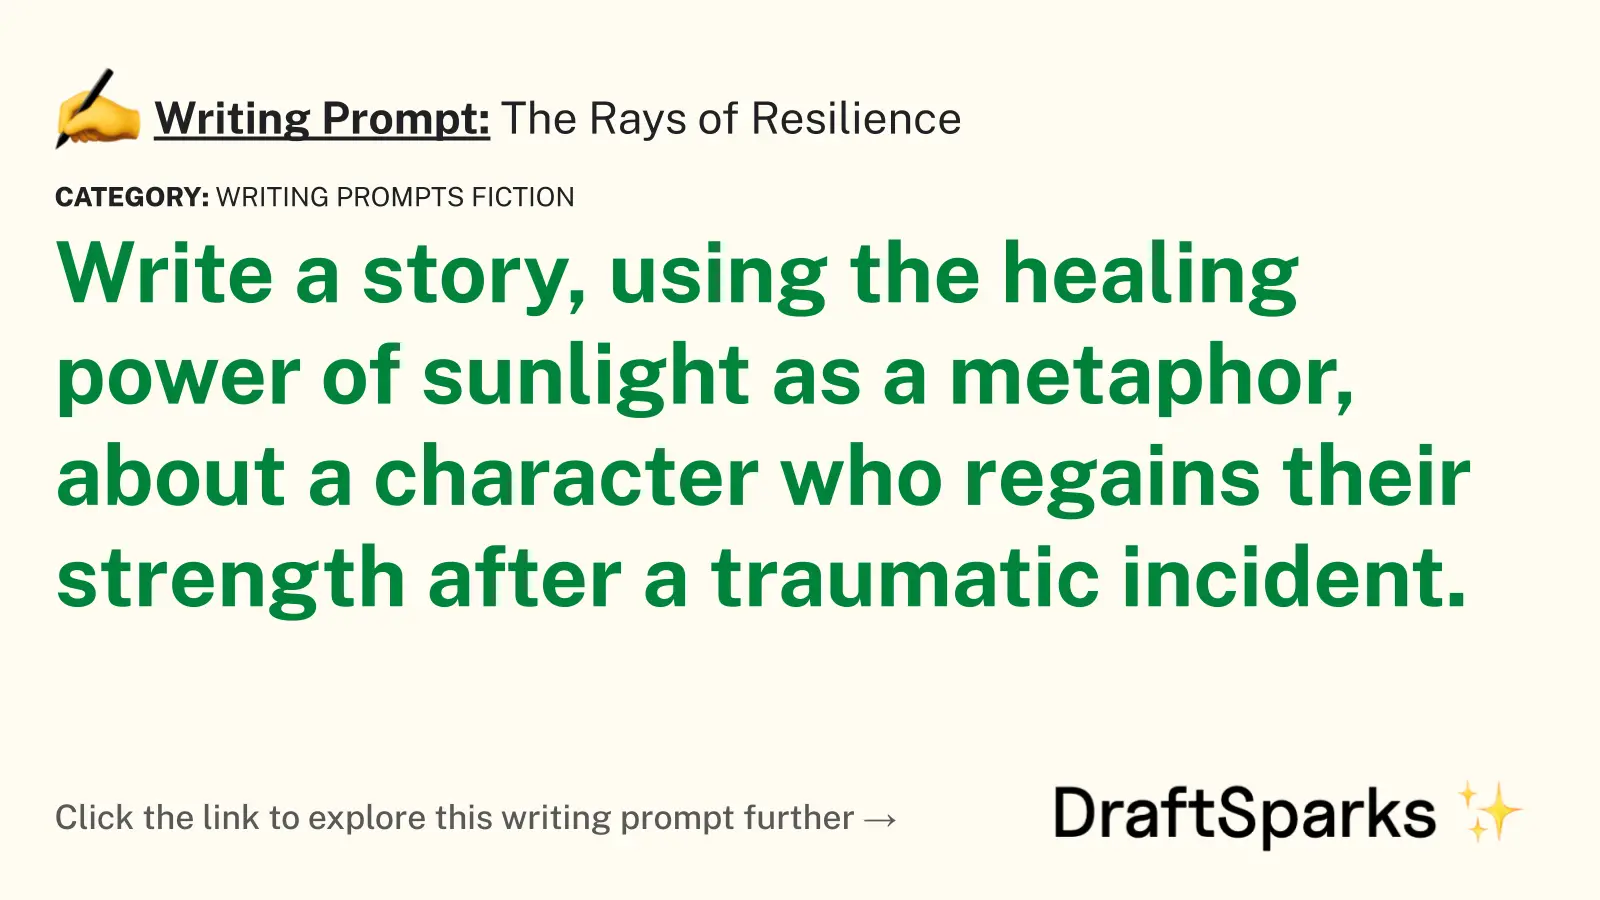 The Rays of Resilience